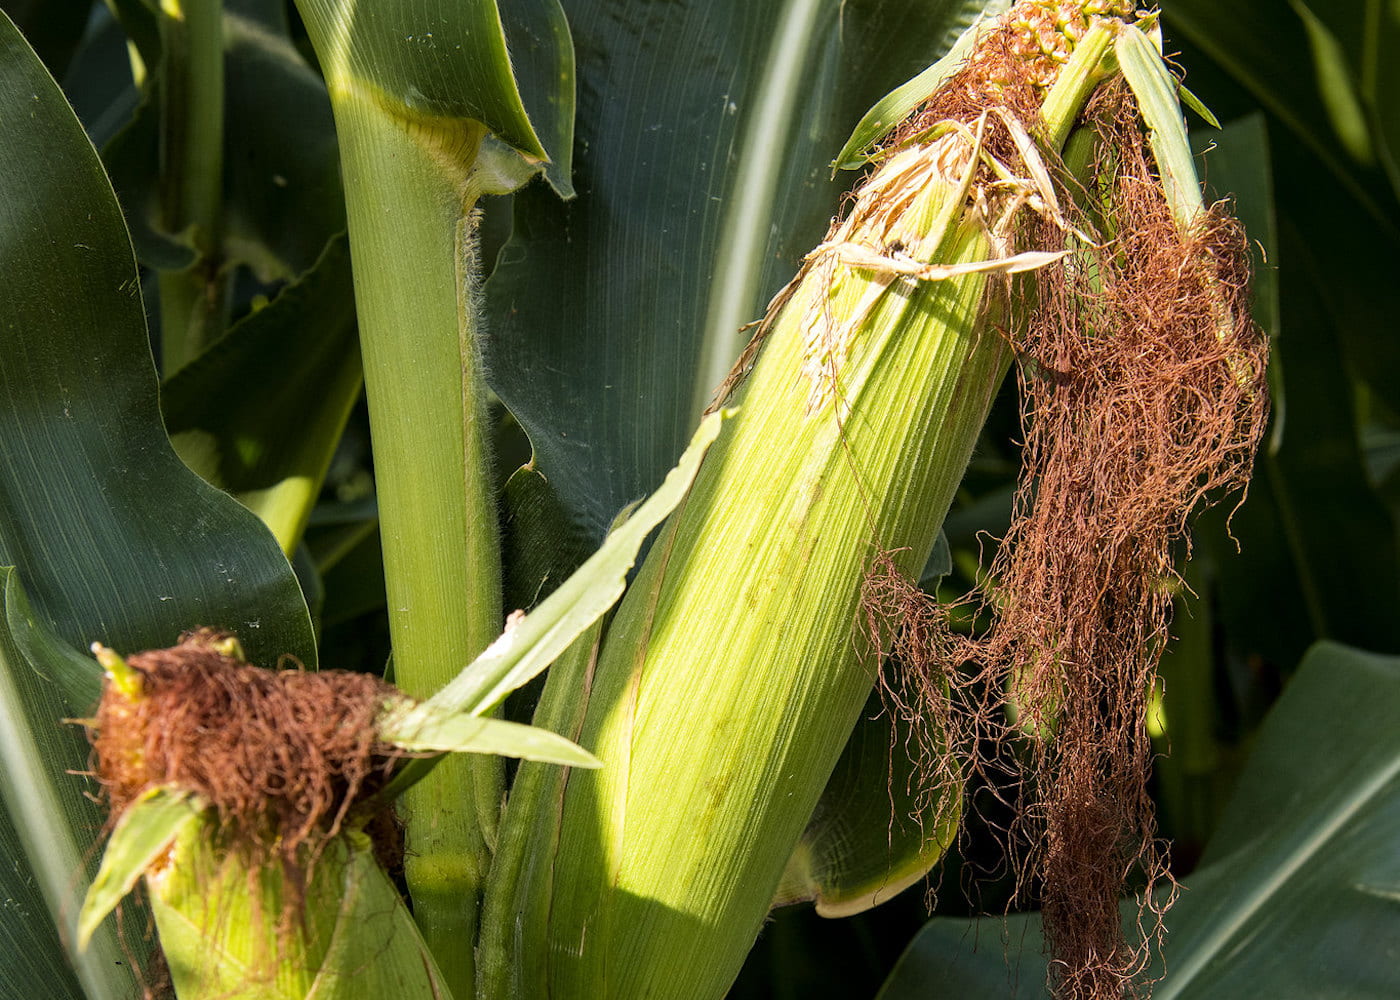 The 2022 Arkansas corn crop was impacted by high temperatures and drought. (Special to The Commercial/University of Arkansas System Division of Agriculture)